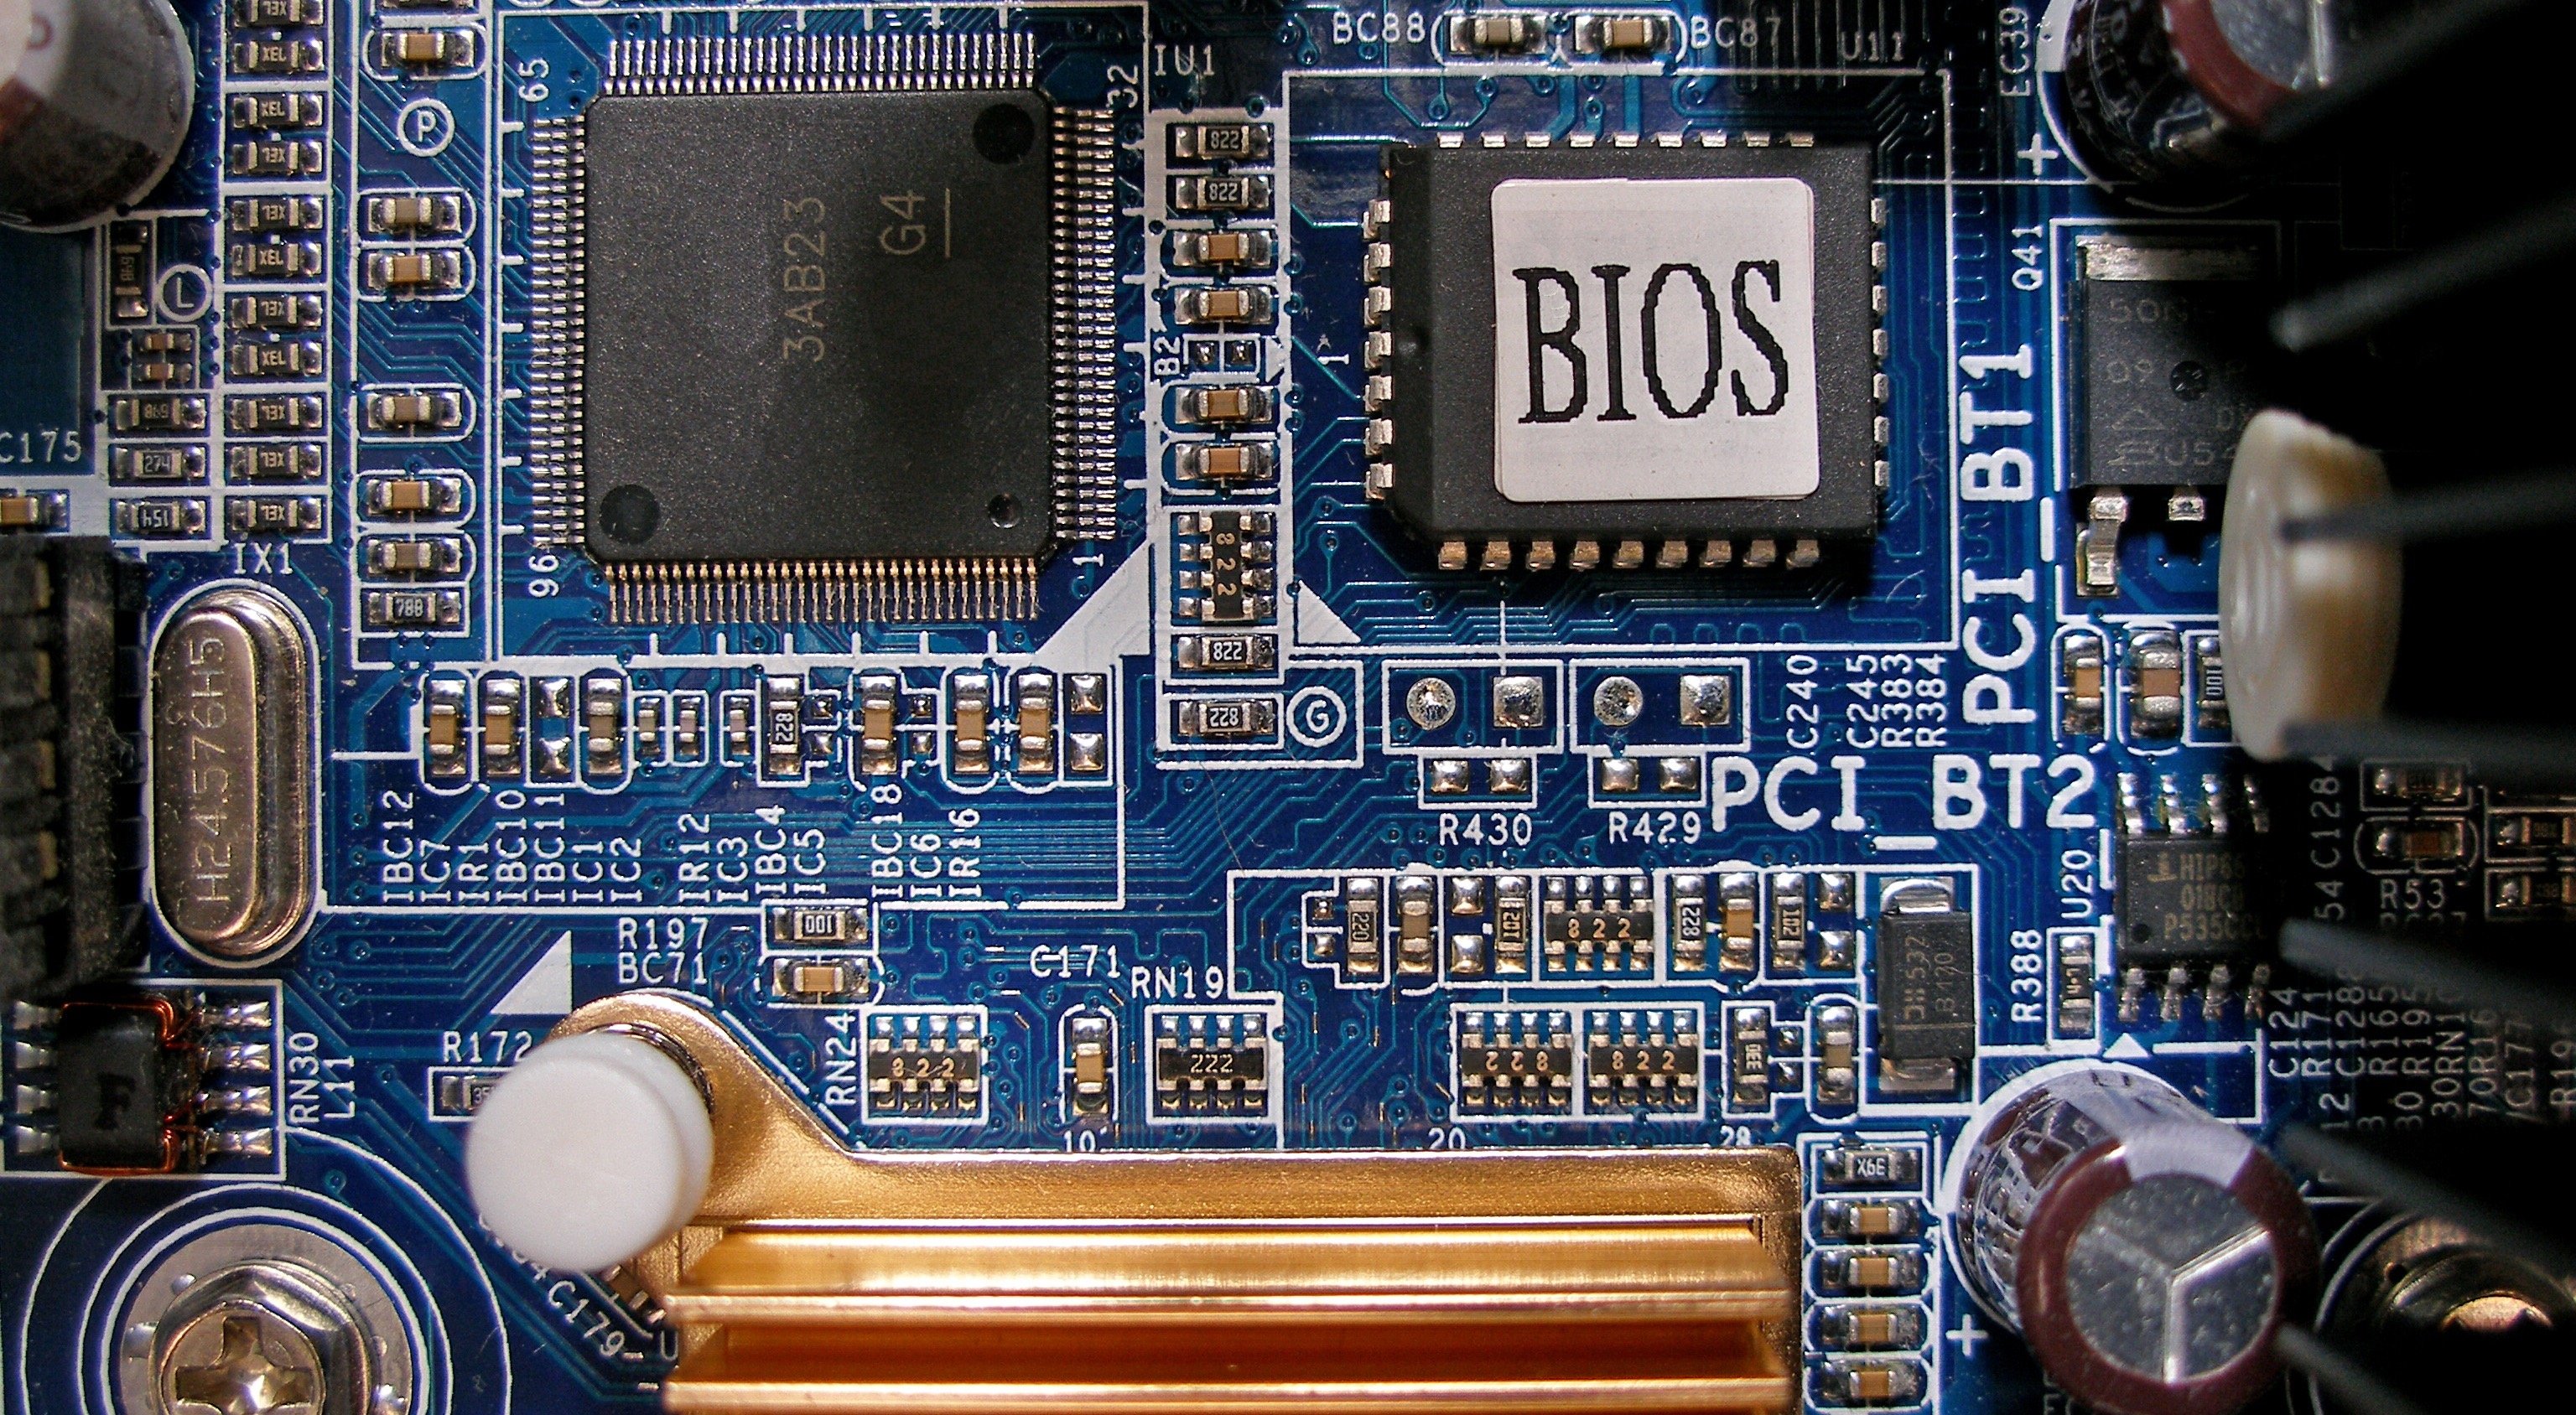 What is BIOS (Basic Input/Output System)?